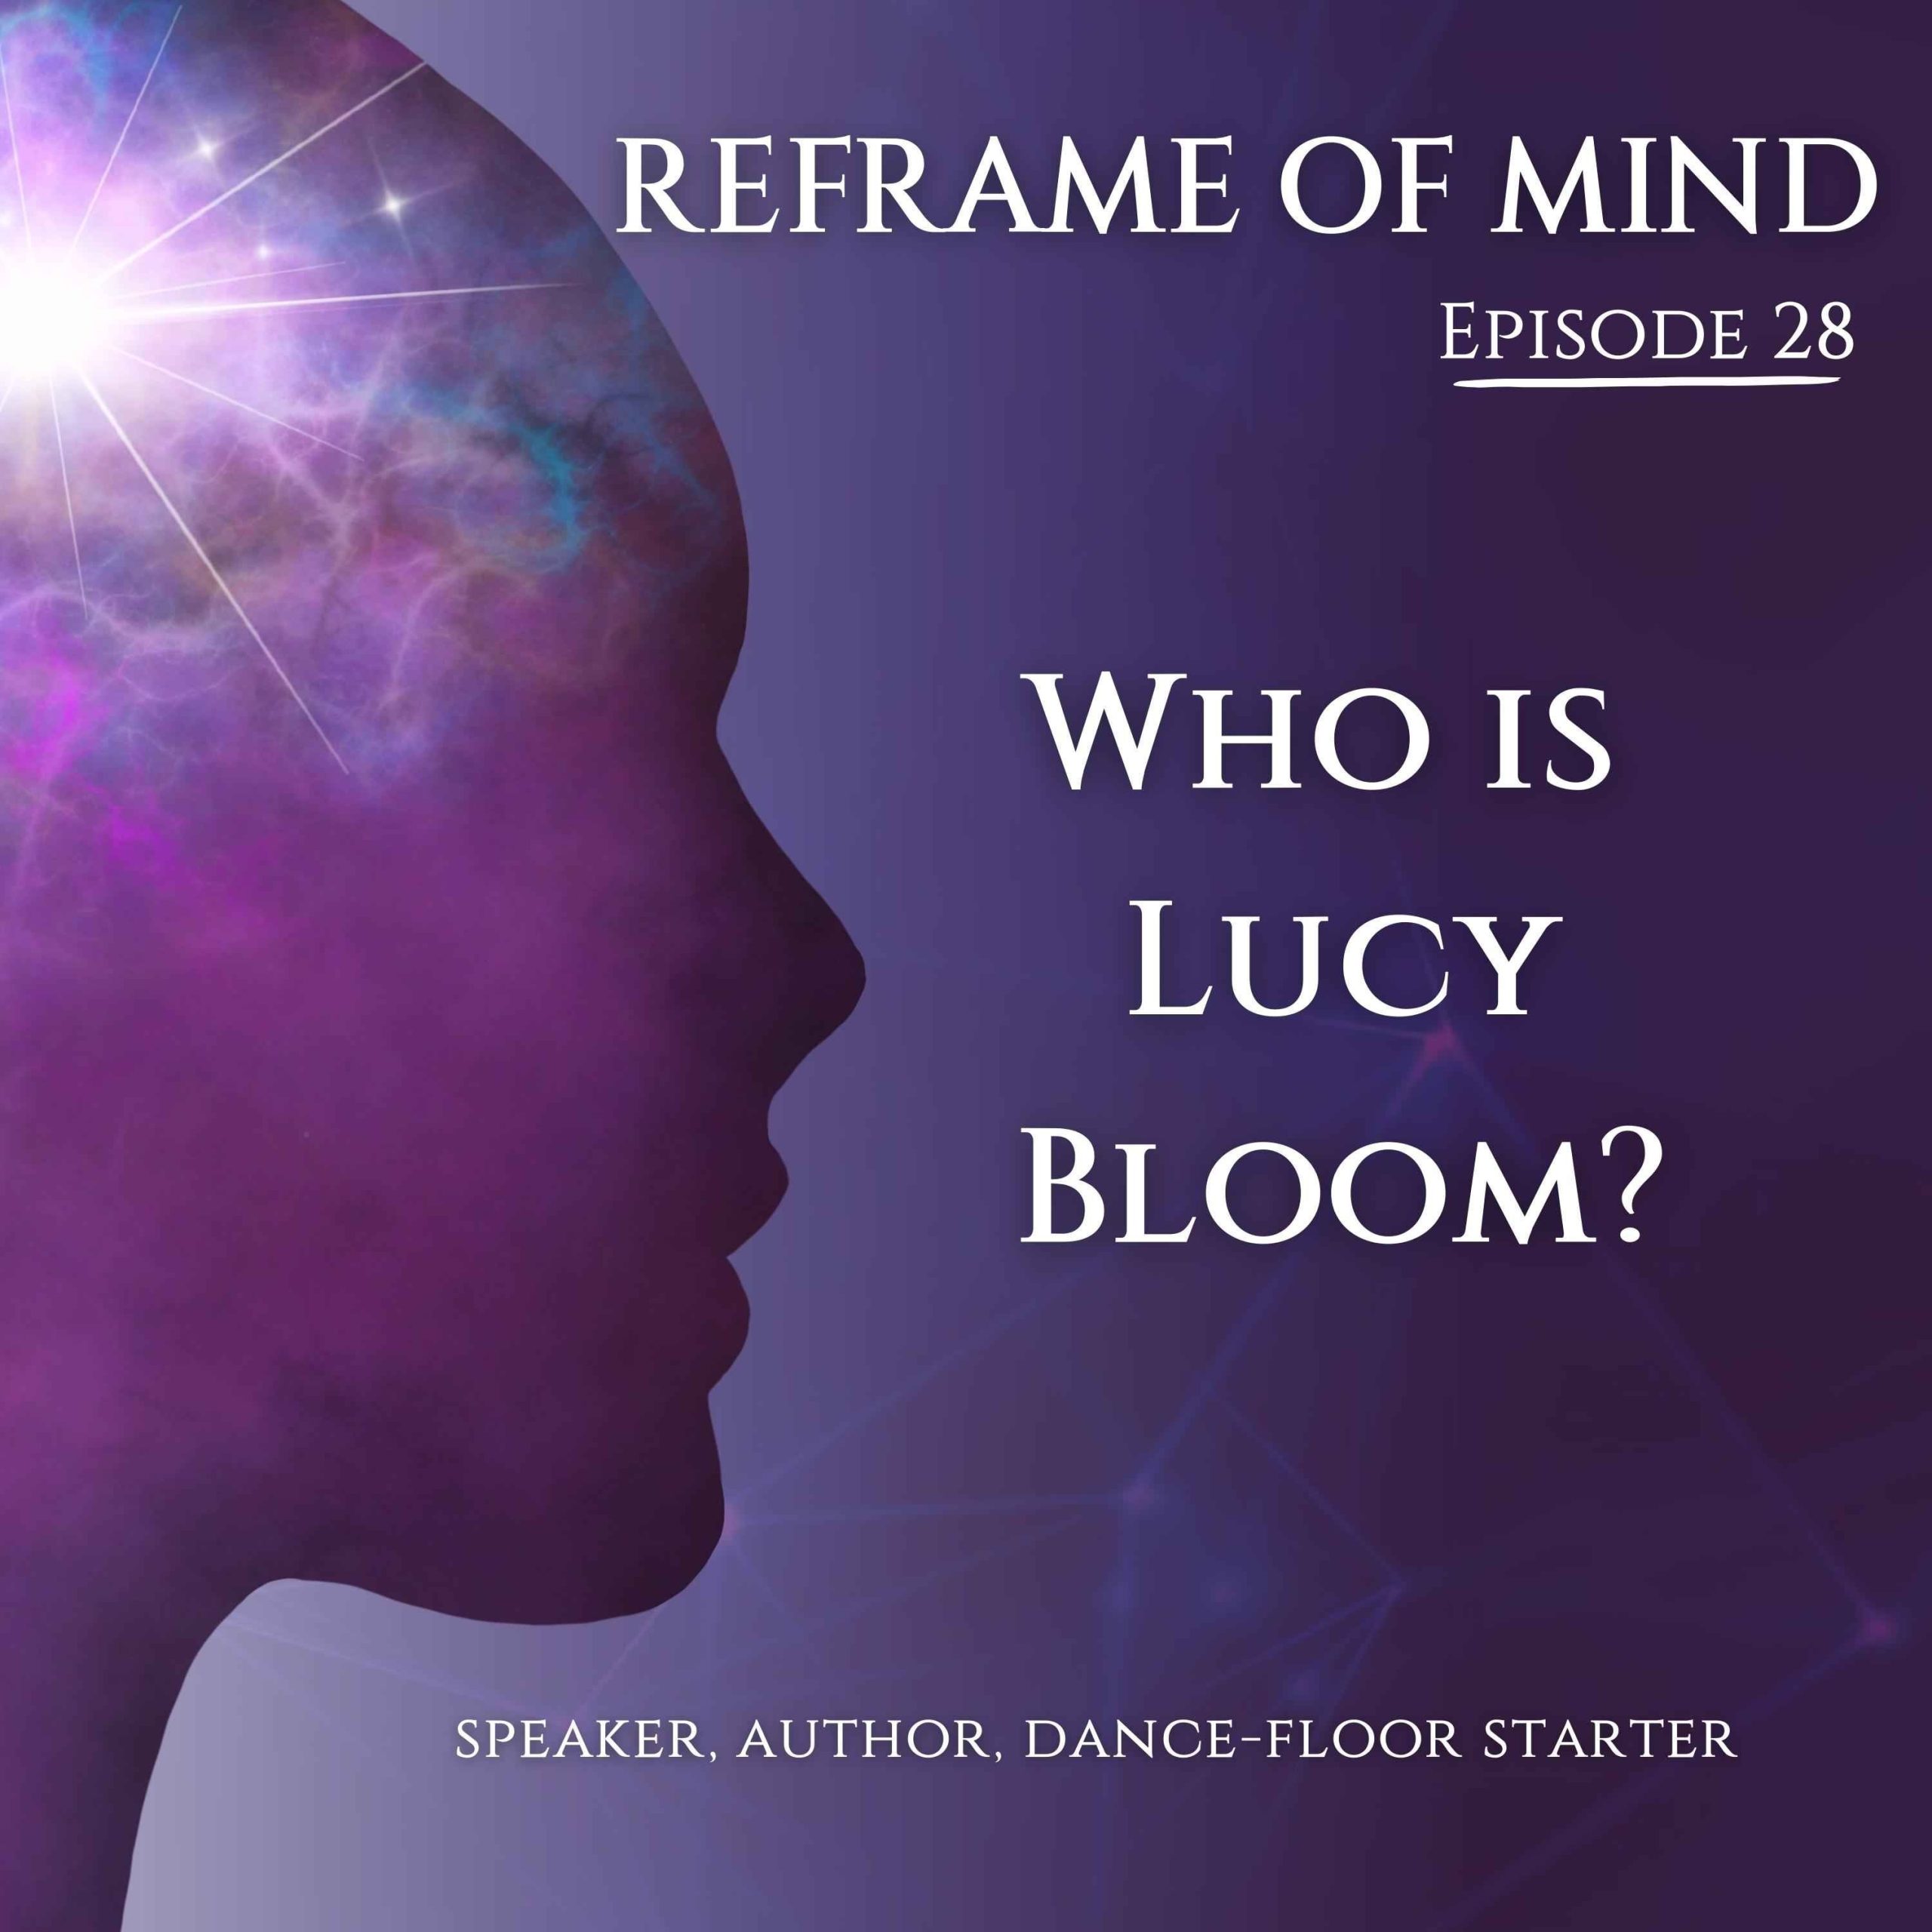 Who is Lucy Bloom?